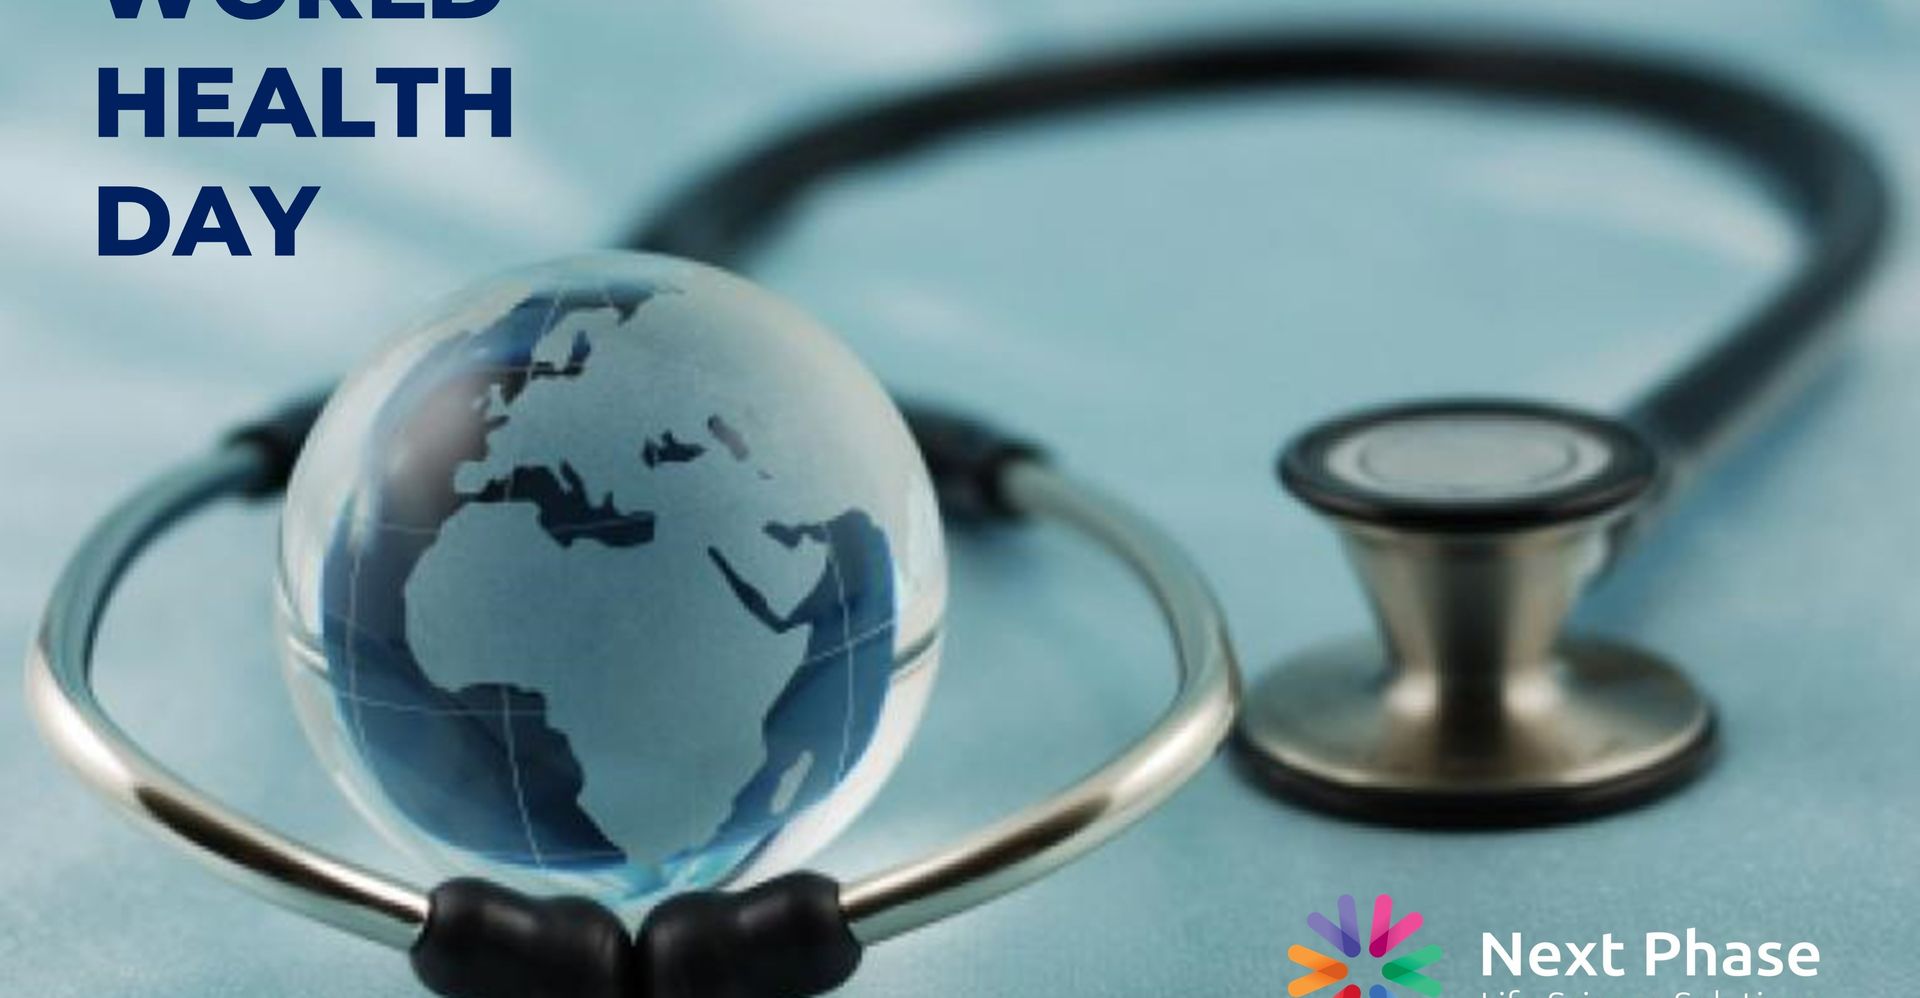 Next Phase - World Health Day is celebrated on 7th April every year,  to mark the anniversary of the founding of WHO (World Health Organisation) in  1948. 